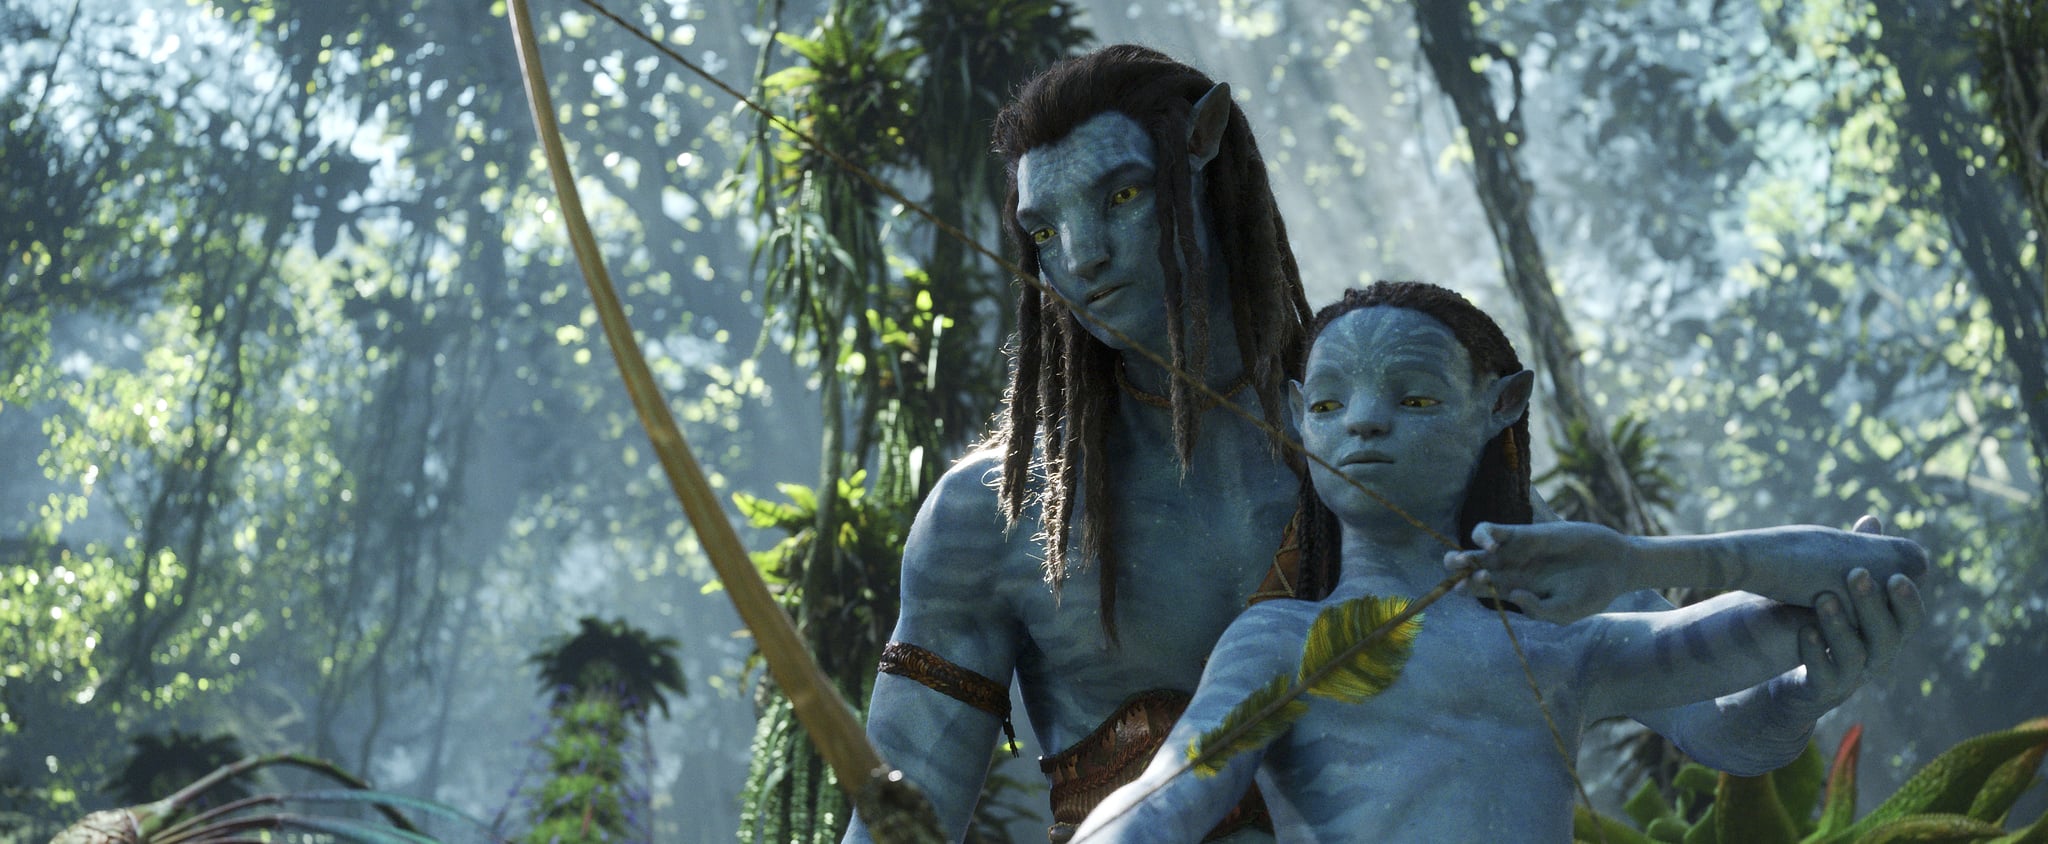 Avatar The Way Of Water Trailer Song Name